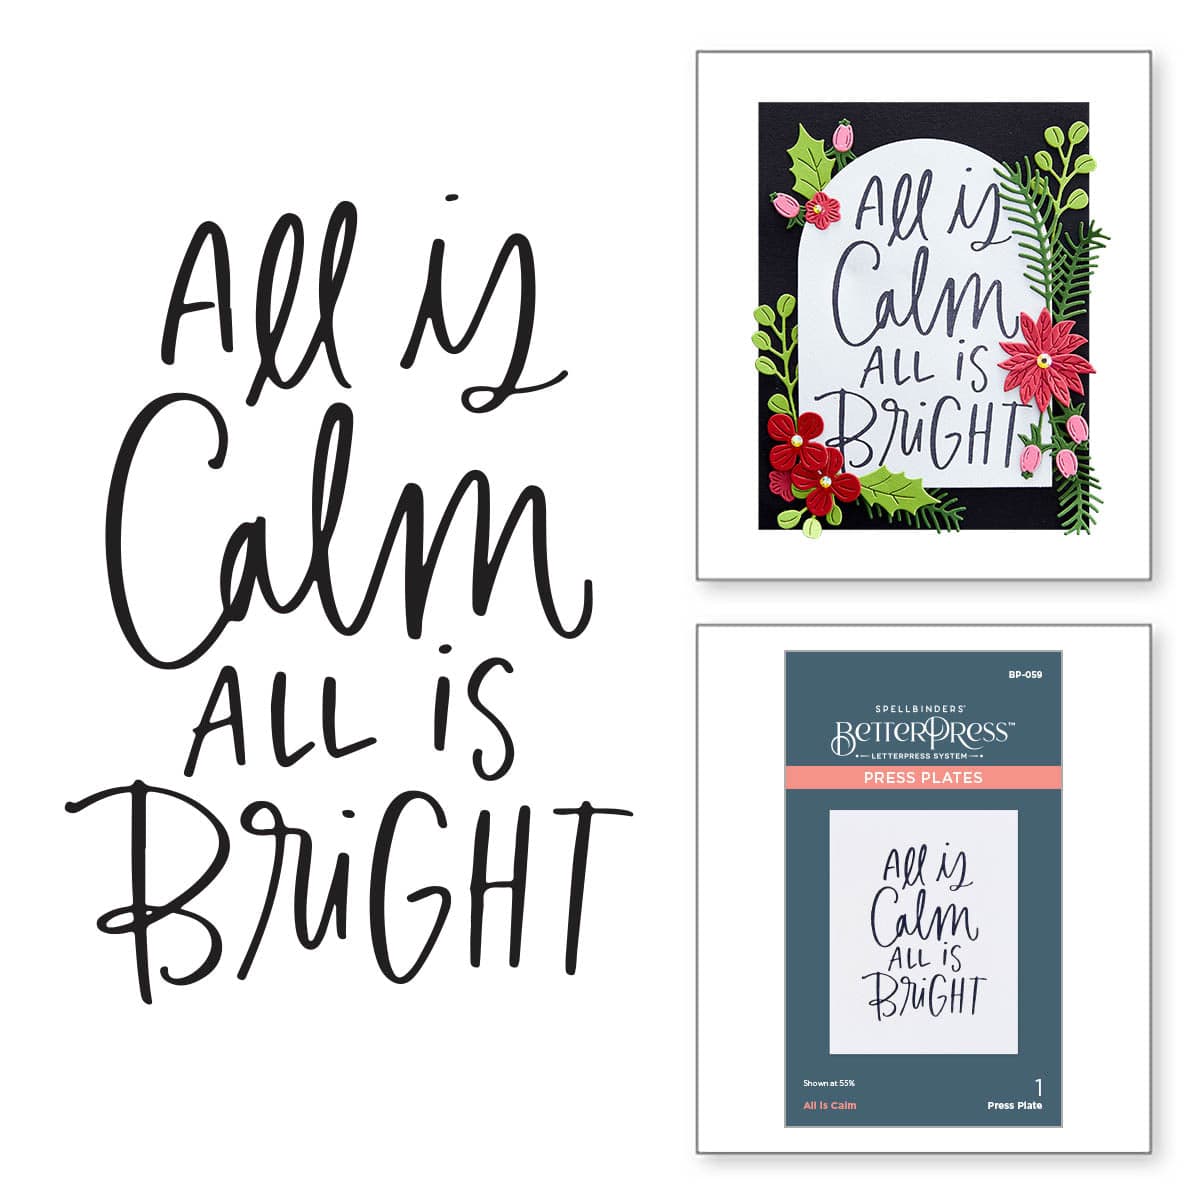 All Is Calm Press Plate from the More BetterPress Christmas Collection -  Spellbinders Paper Arts